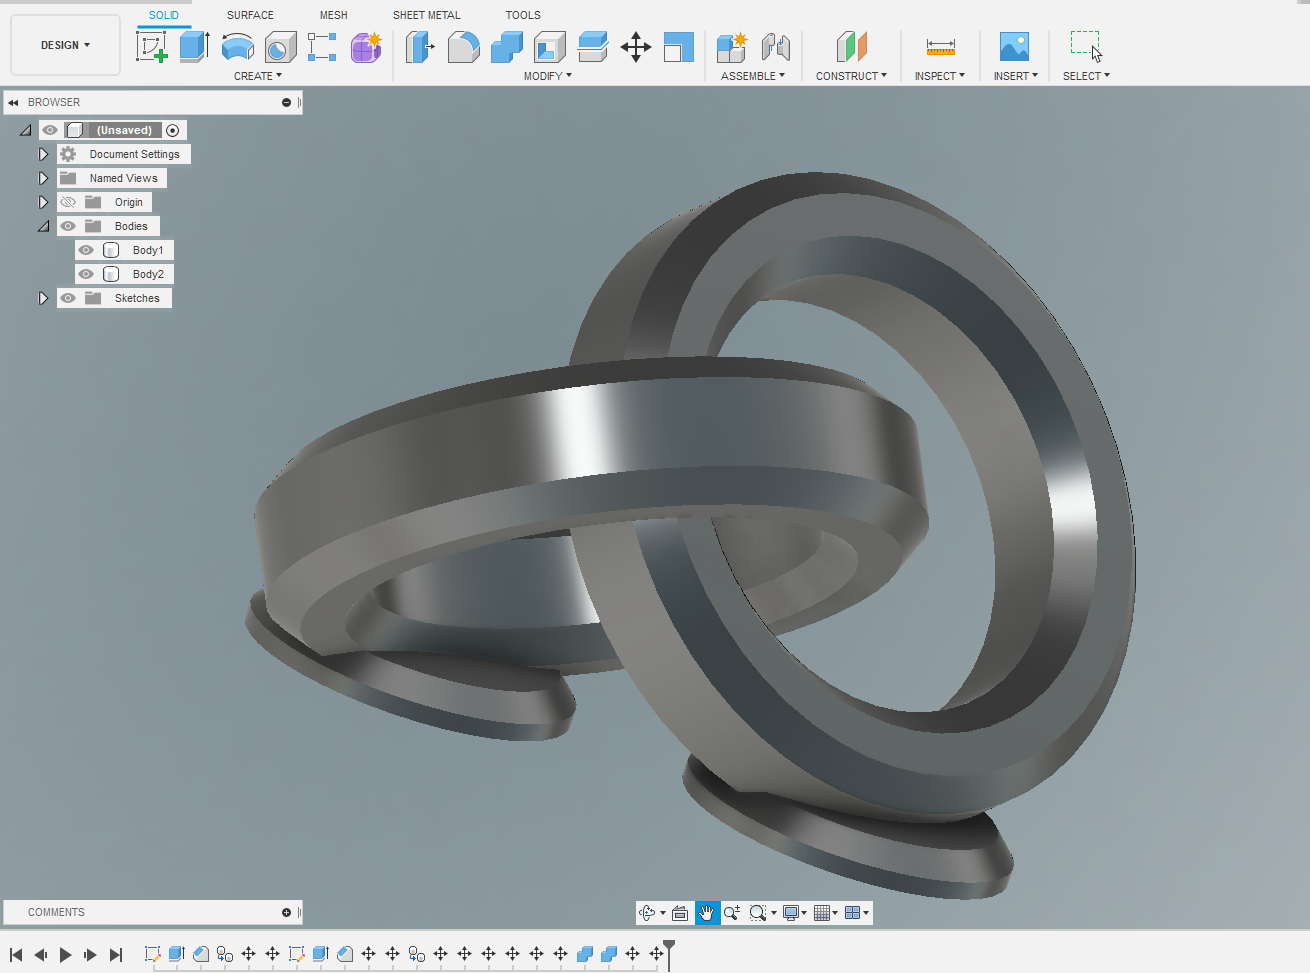 Creating MMU models: Export model from Fusion 360